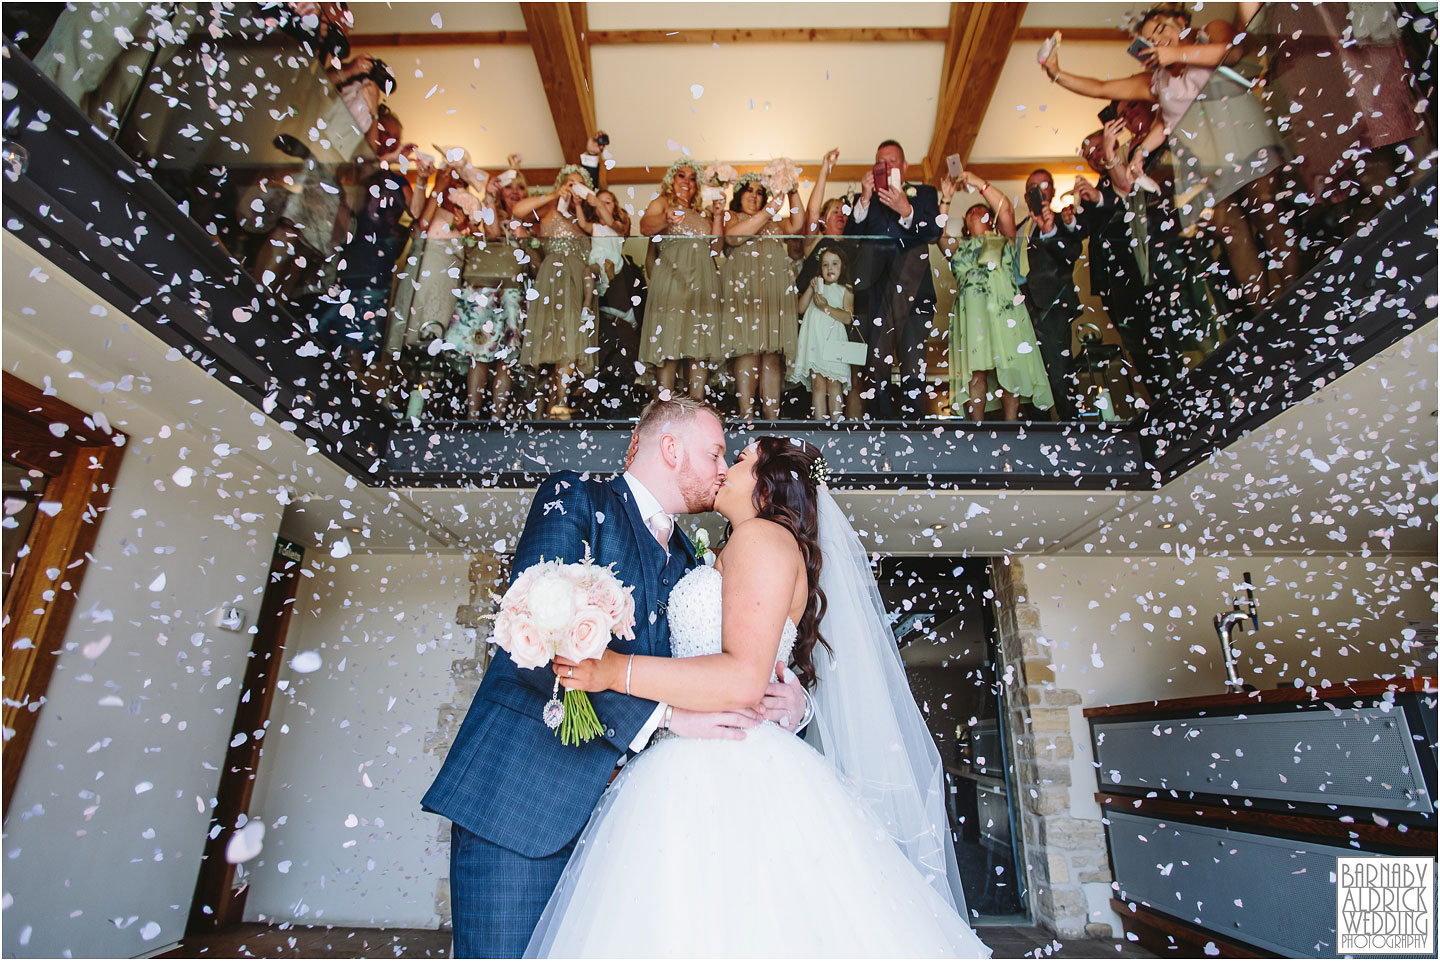 A bride and groom kiss under while guests throw confetti over them from the balcony during there beautiful barn ceremony at Priory Cottages wedding venue venue between Tadcaster and Wetherby